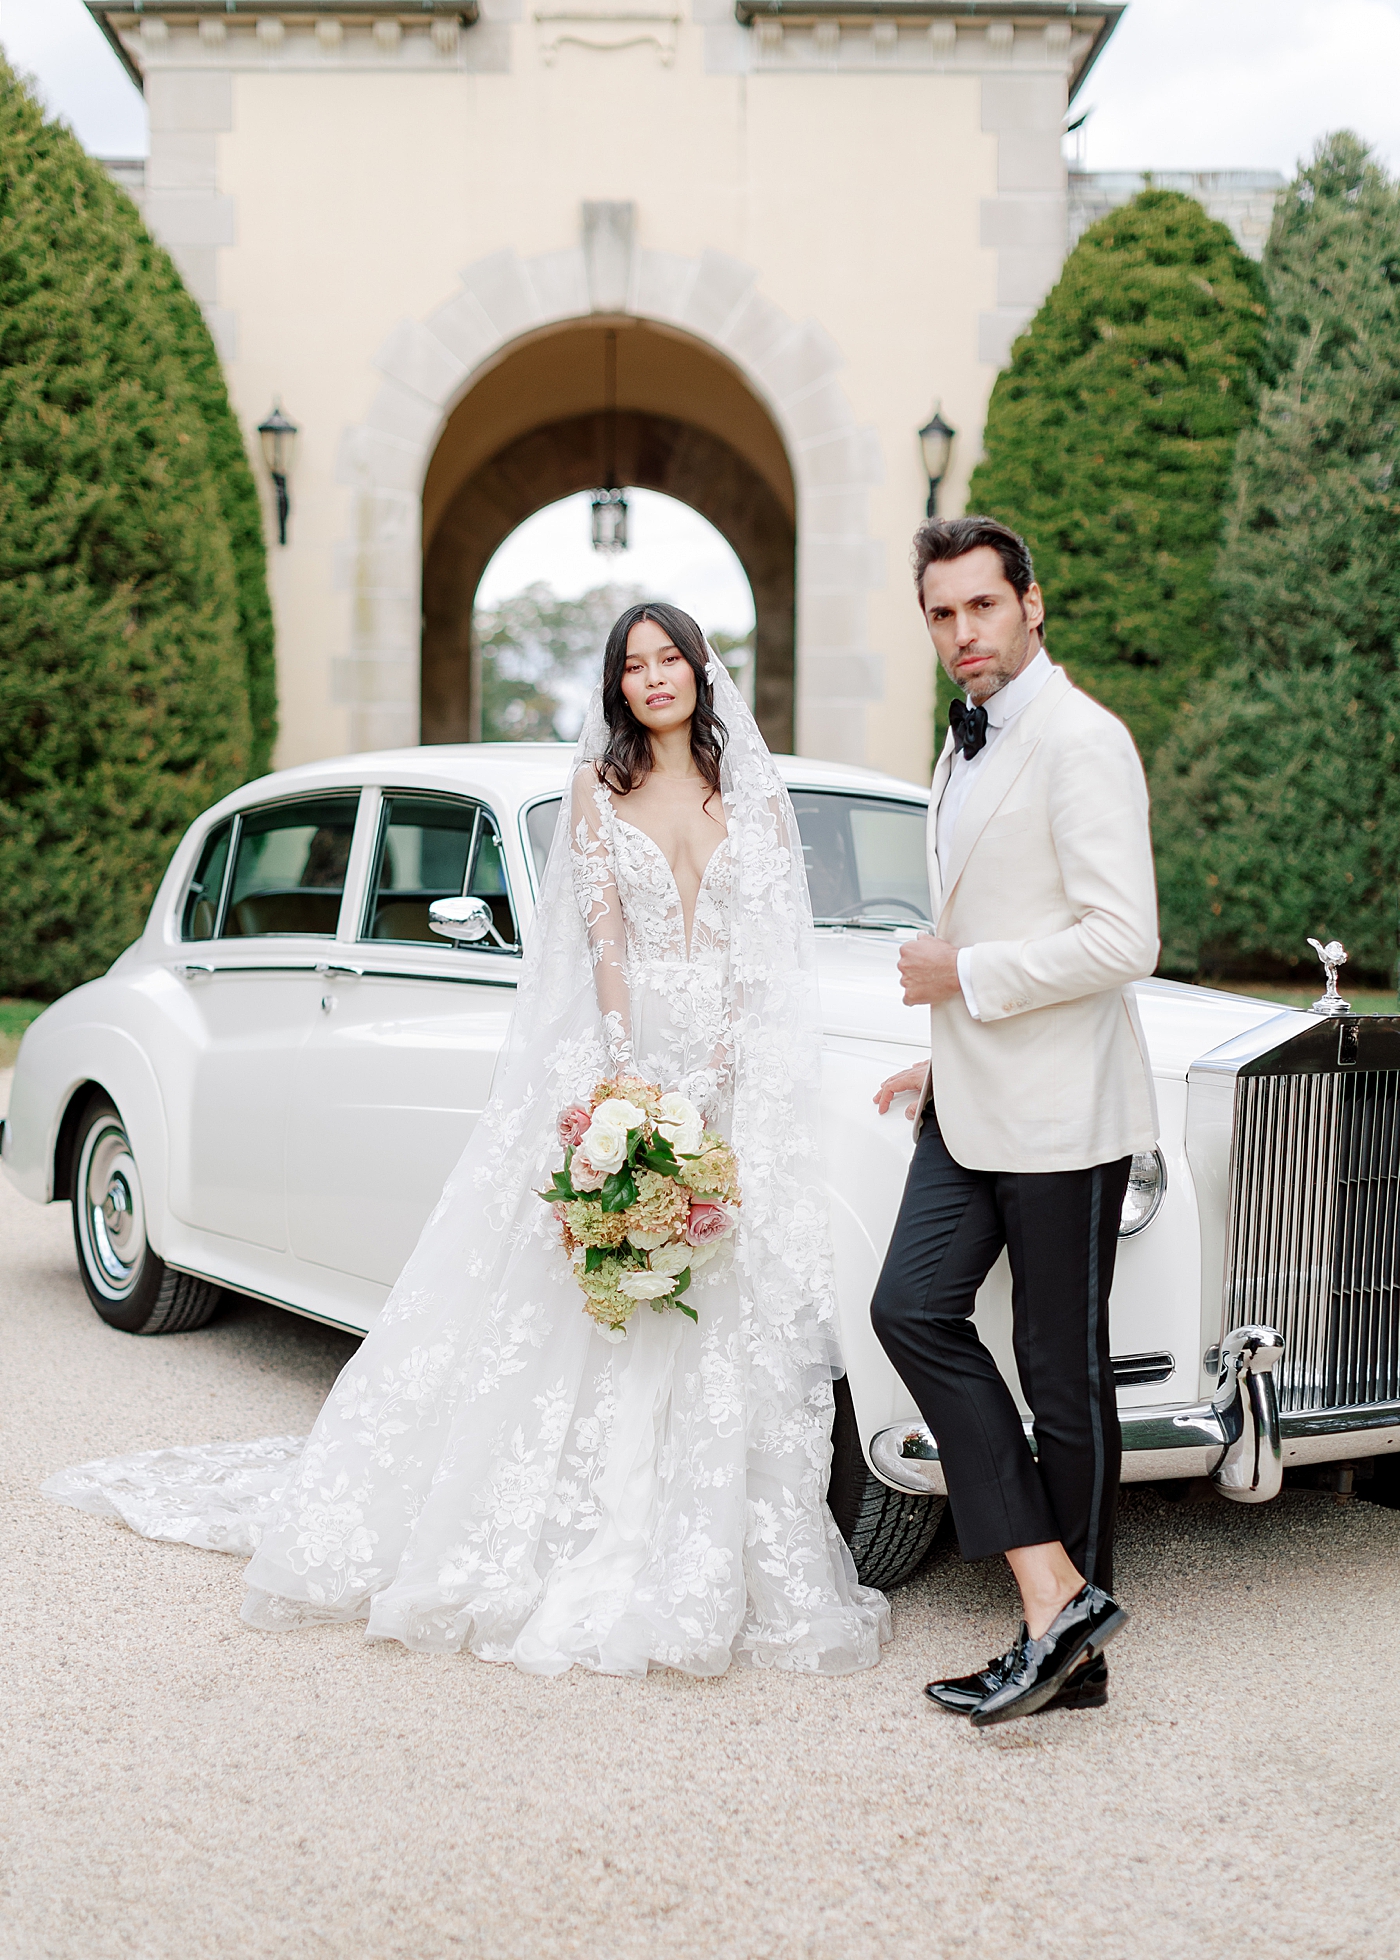 Bride and groom leaning on a classic car in a gravel driveway during Oheka castle wedding | Image by Hope Helmuth Photography